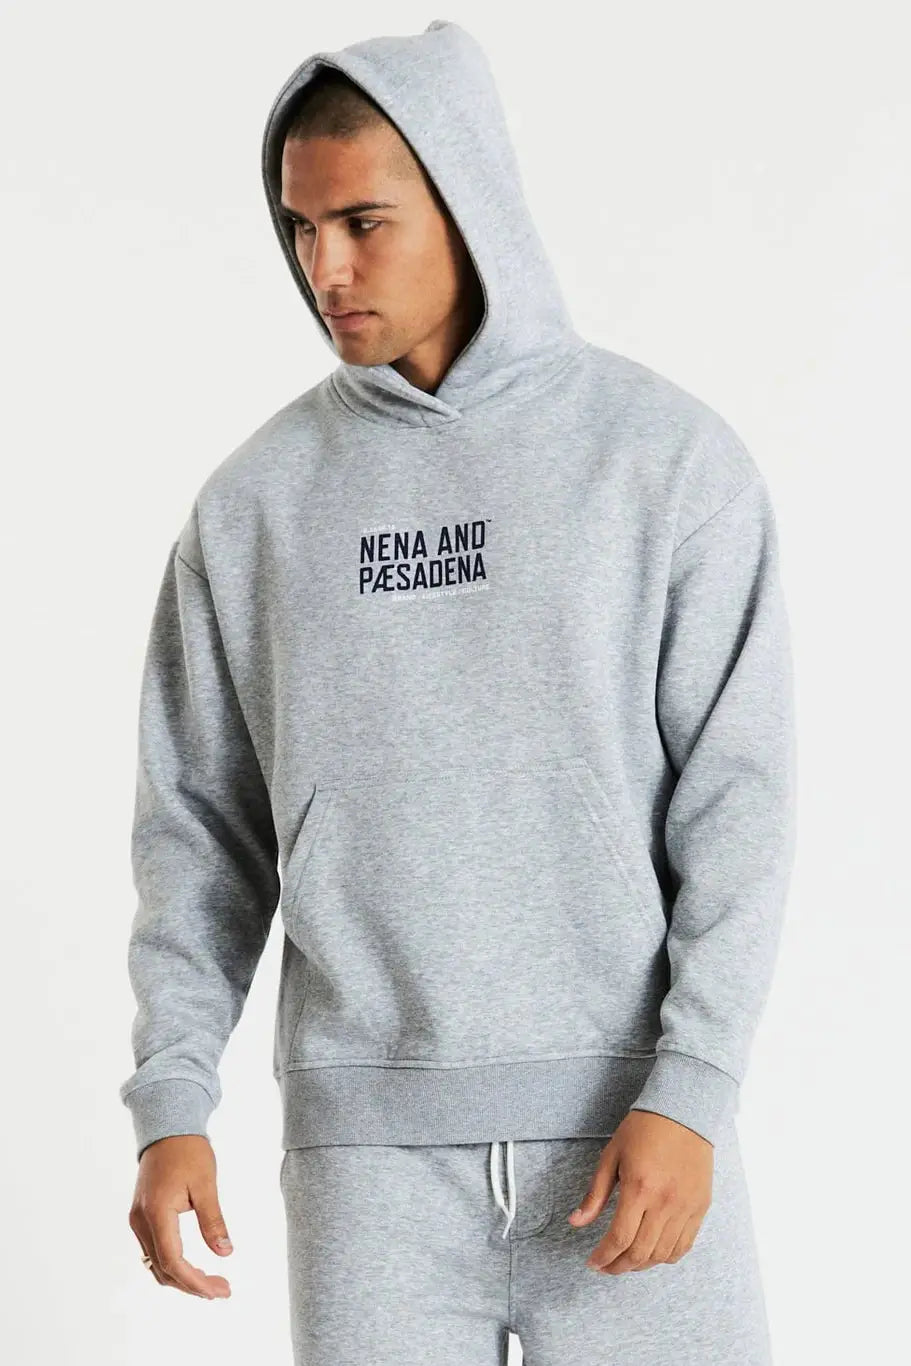 Nxp tournament relaxed hooded sweater- grey marle